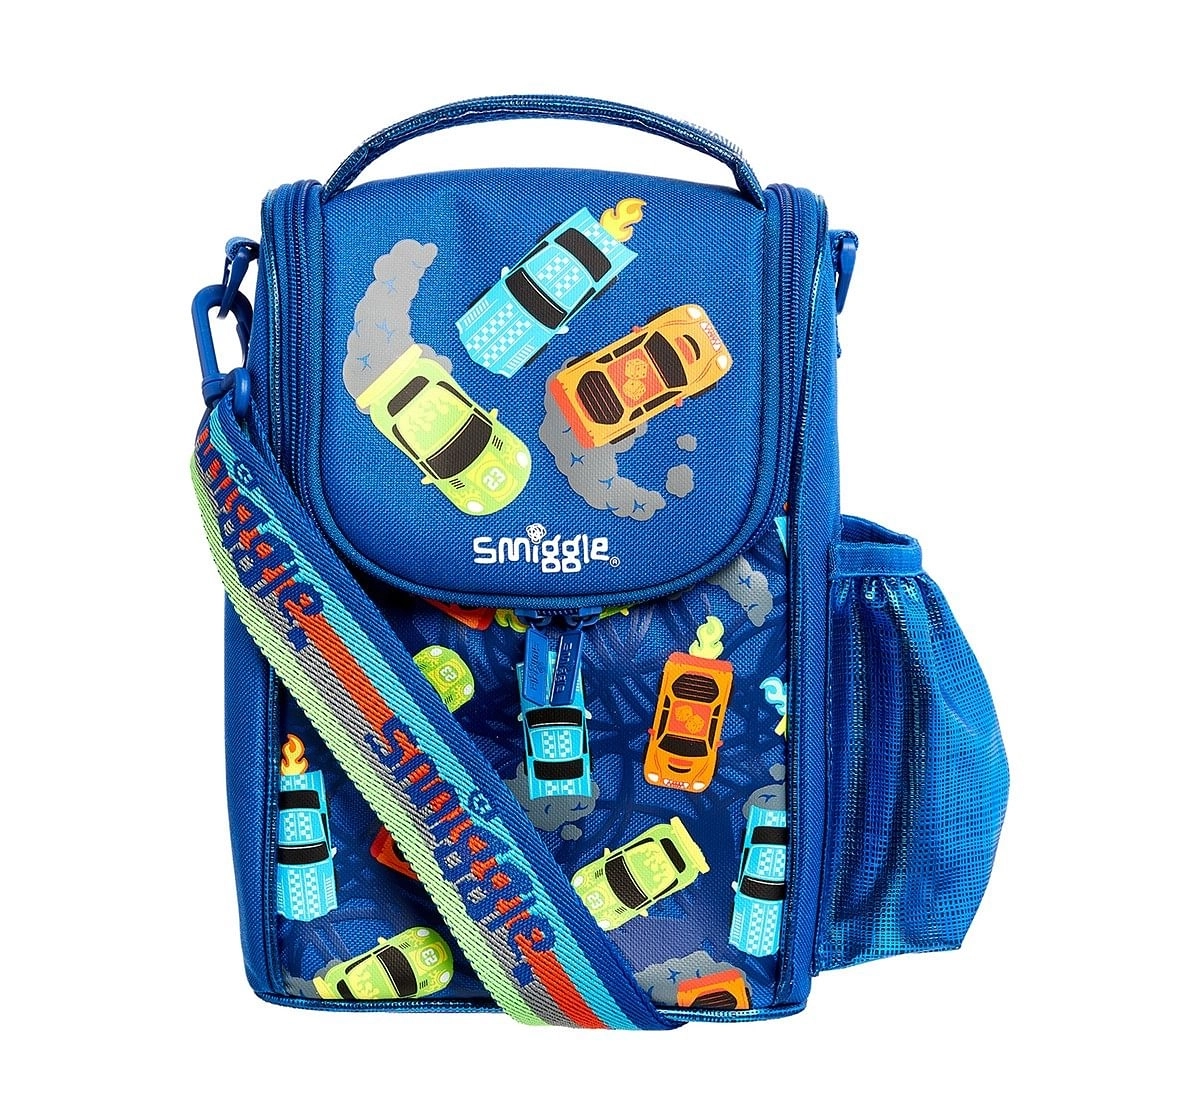 Smiggle Whirl Junior Lunchbox with Strap Car Print Bags for Kids age 3Y+ (Royal Blue)